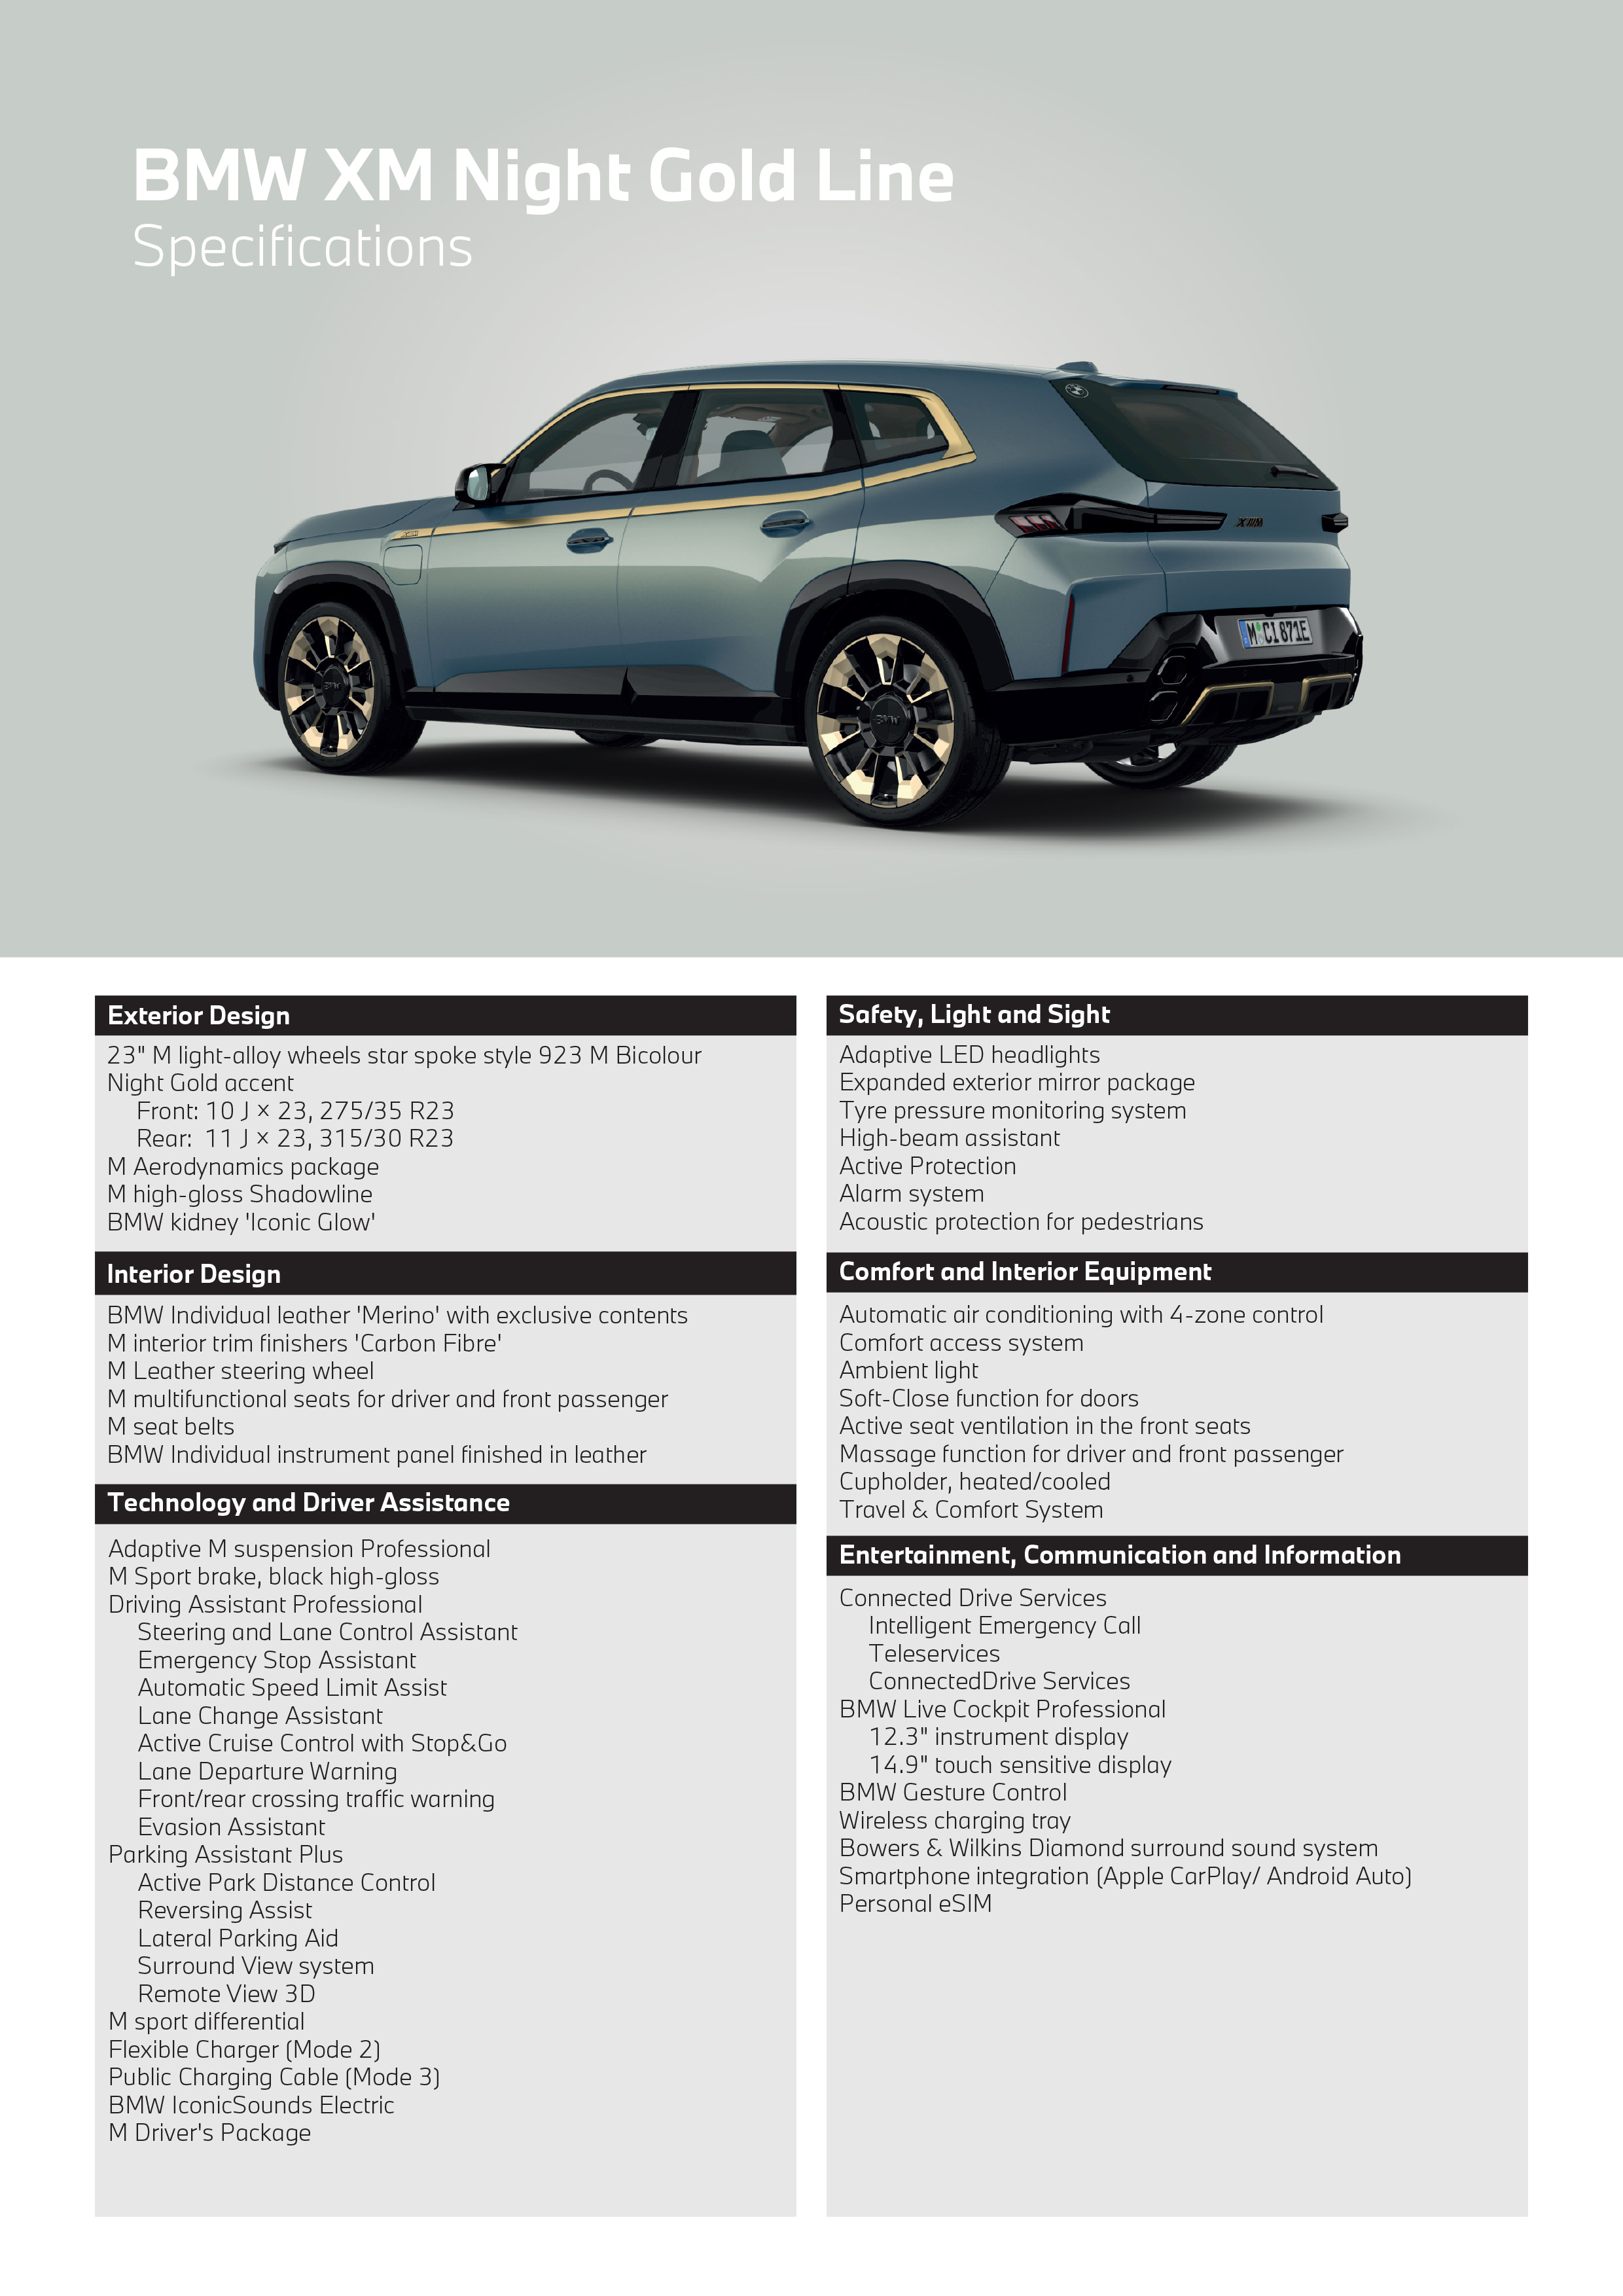 BMW_specs_sheet_XM-Night_PM taille A4_V_01